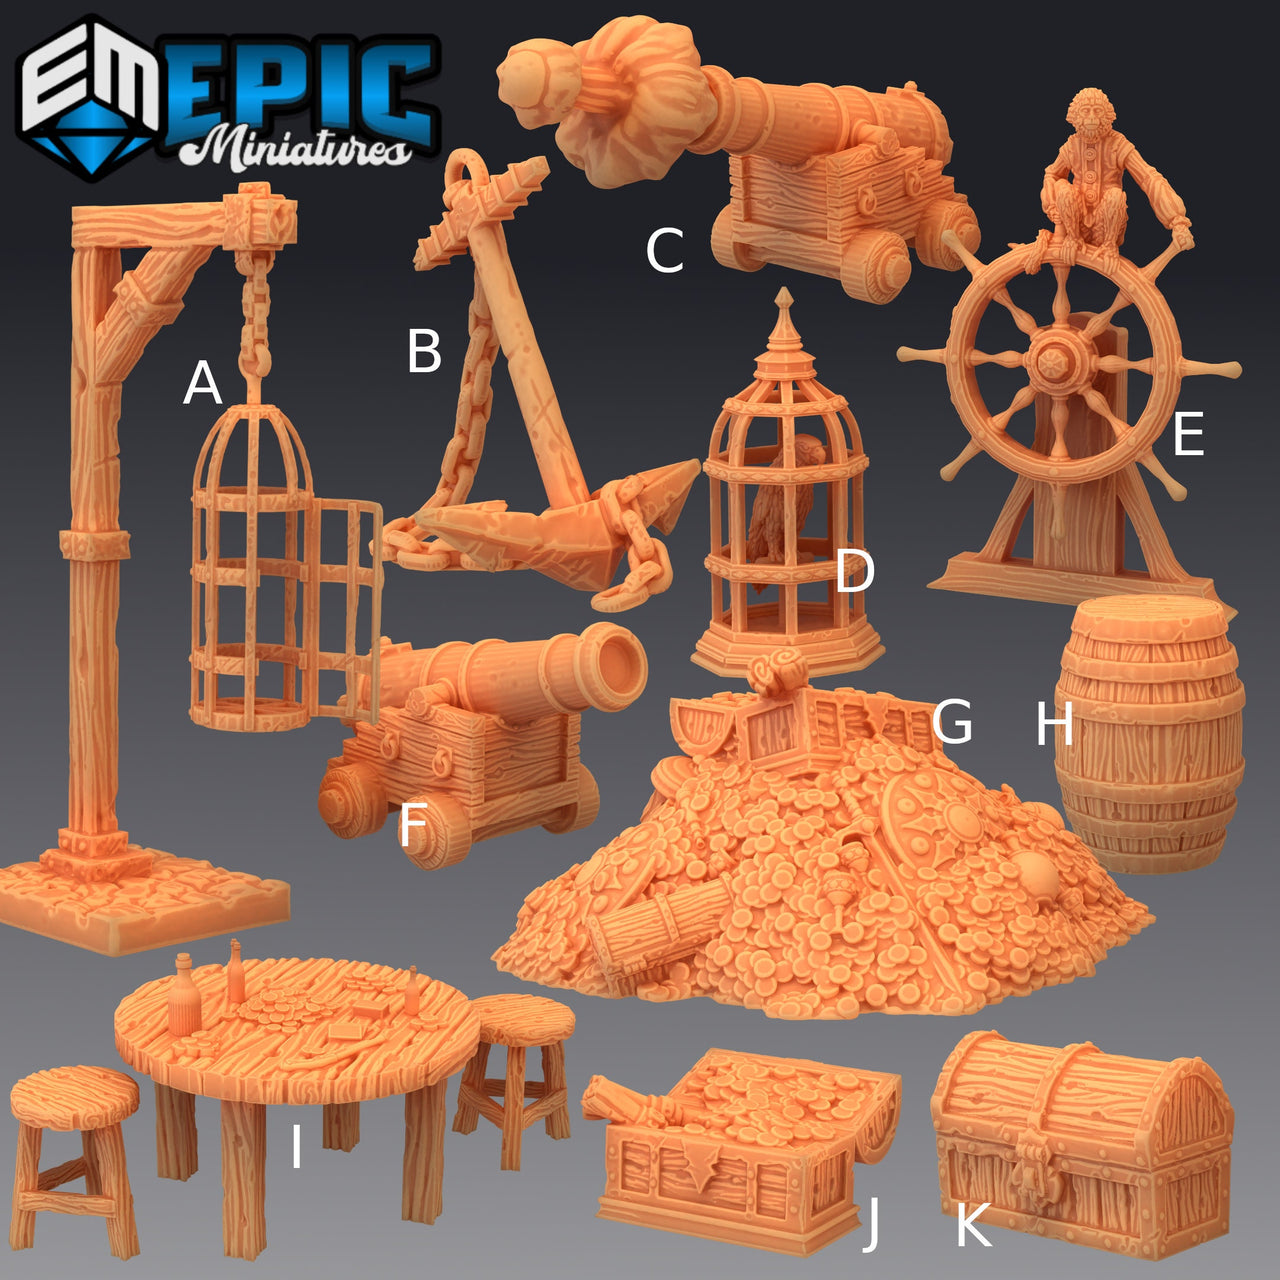 Pirate Ship and Island Props - Epic Miniatures 